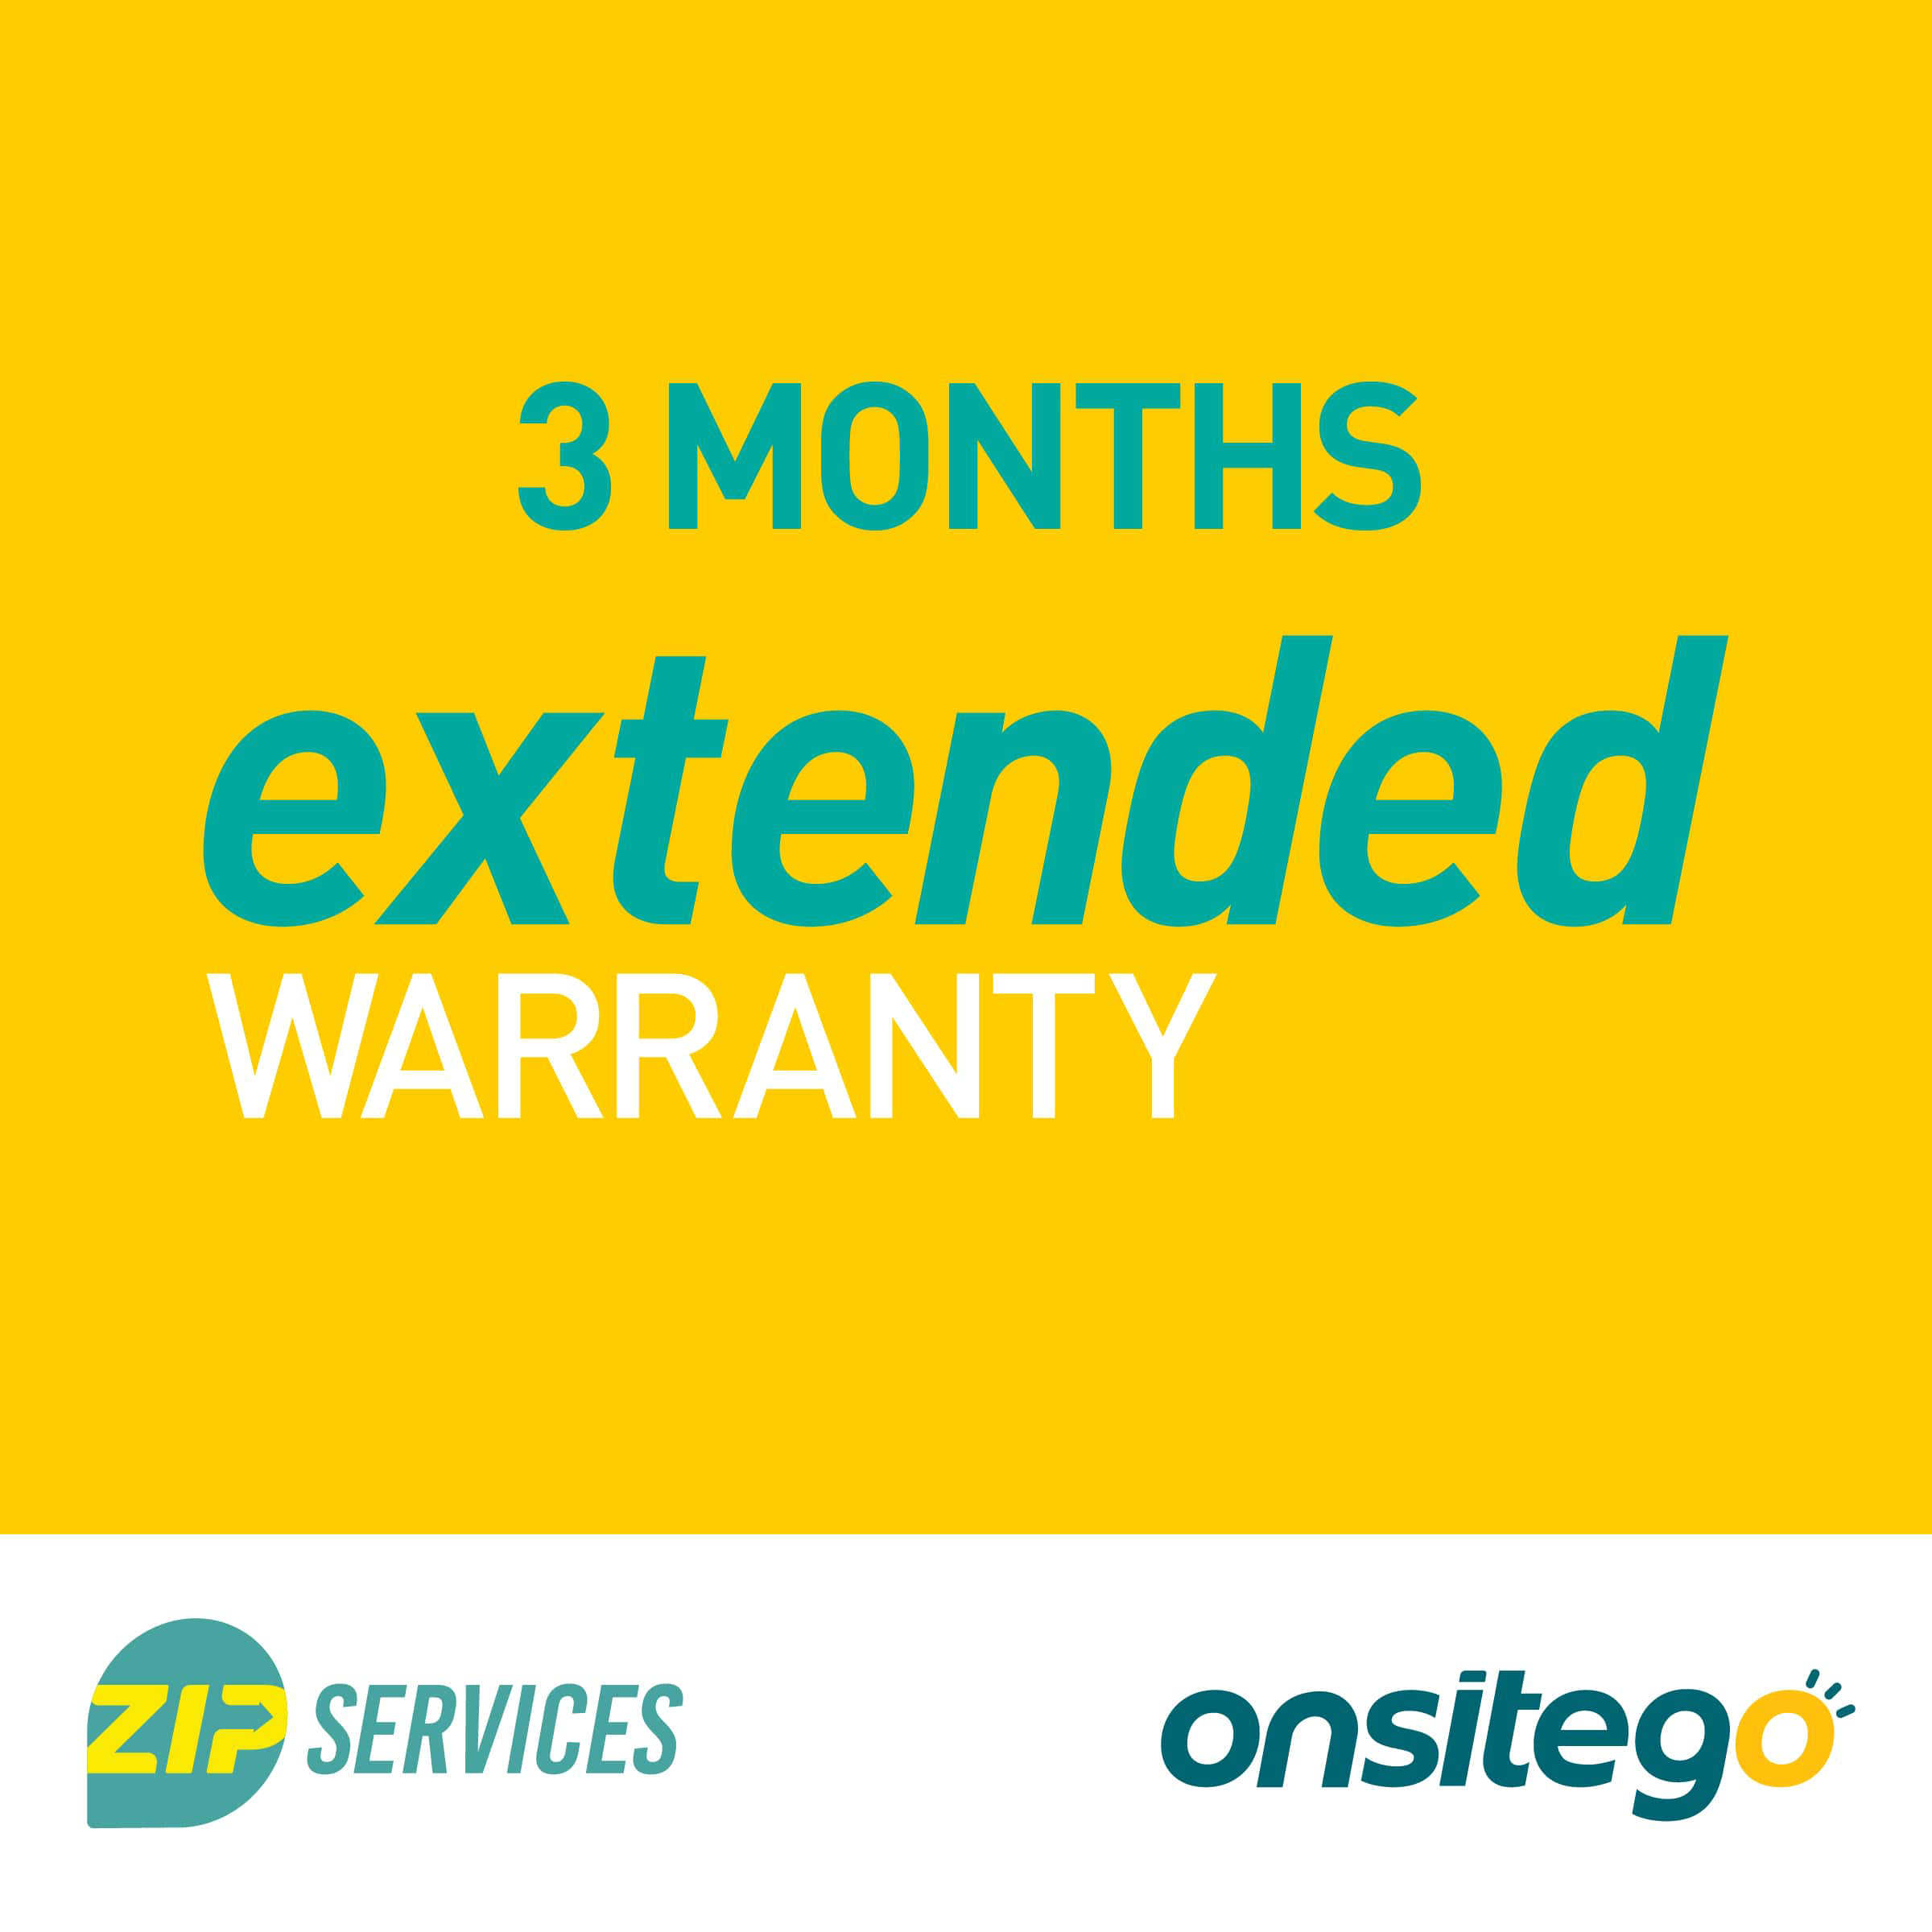 OnsiteGo 3 Months Extended Warranty for PC Accessory  Rs.9001 - Rs.10000_1